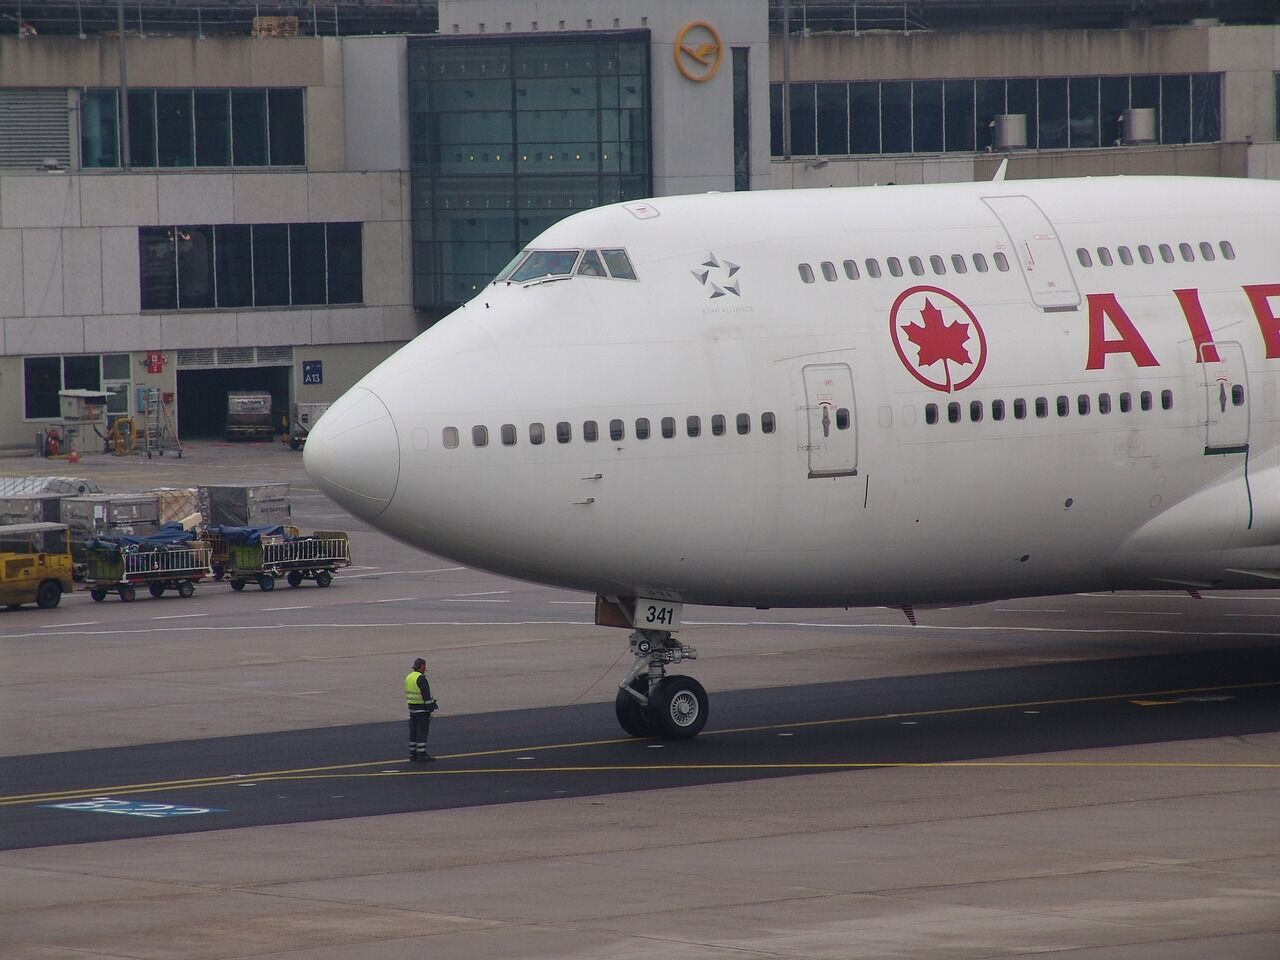 Air Canada plane makes an emergency landing due to depressurization in the cabin